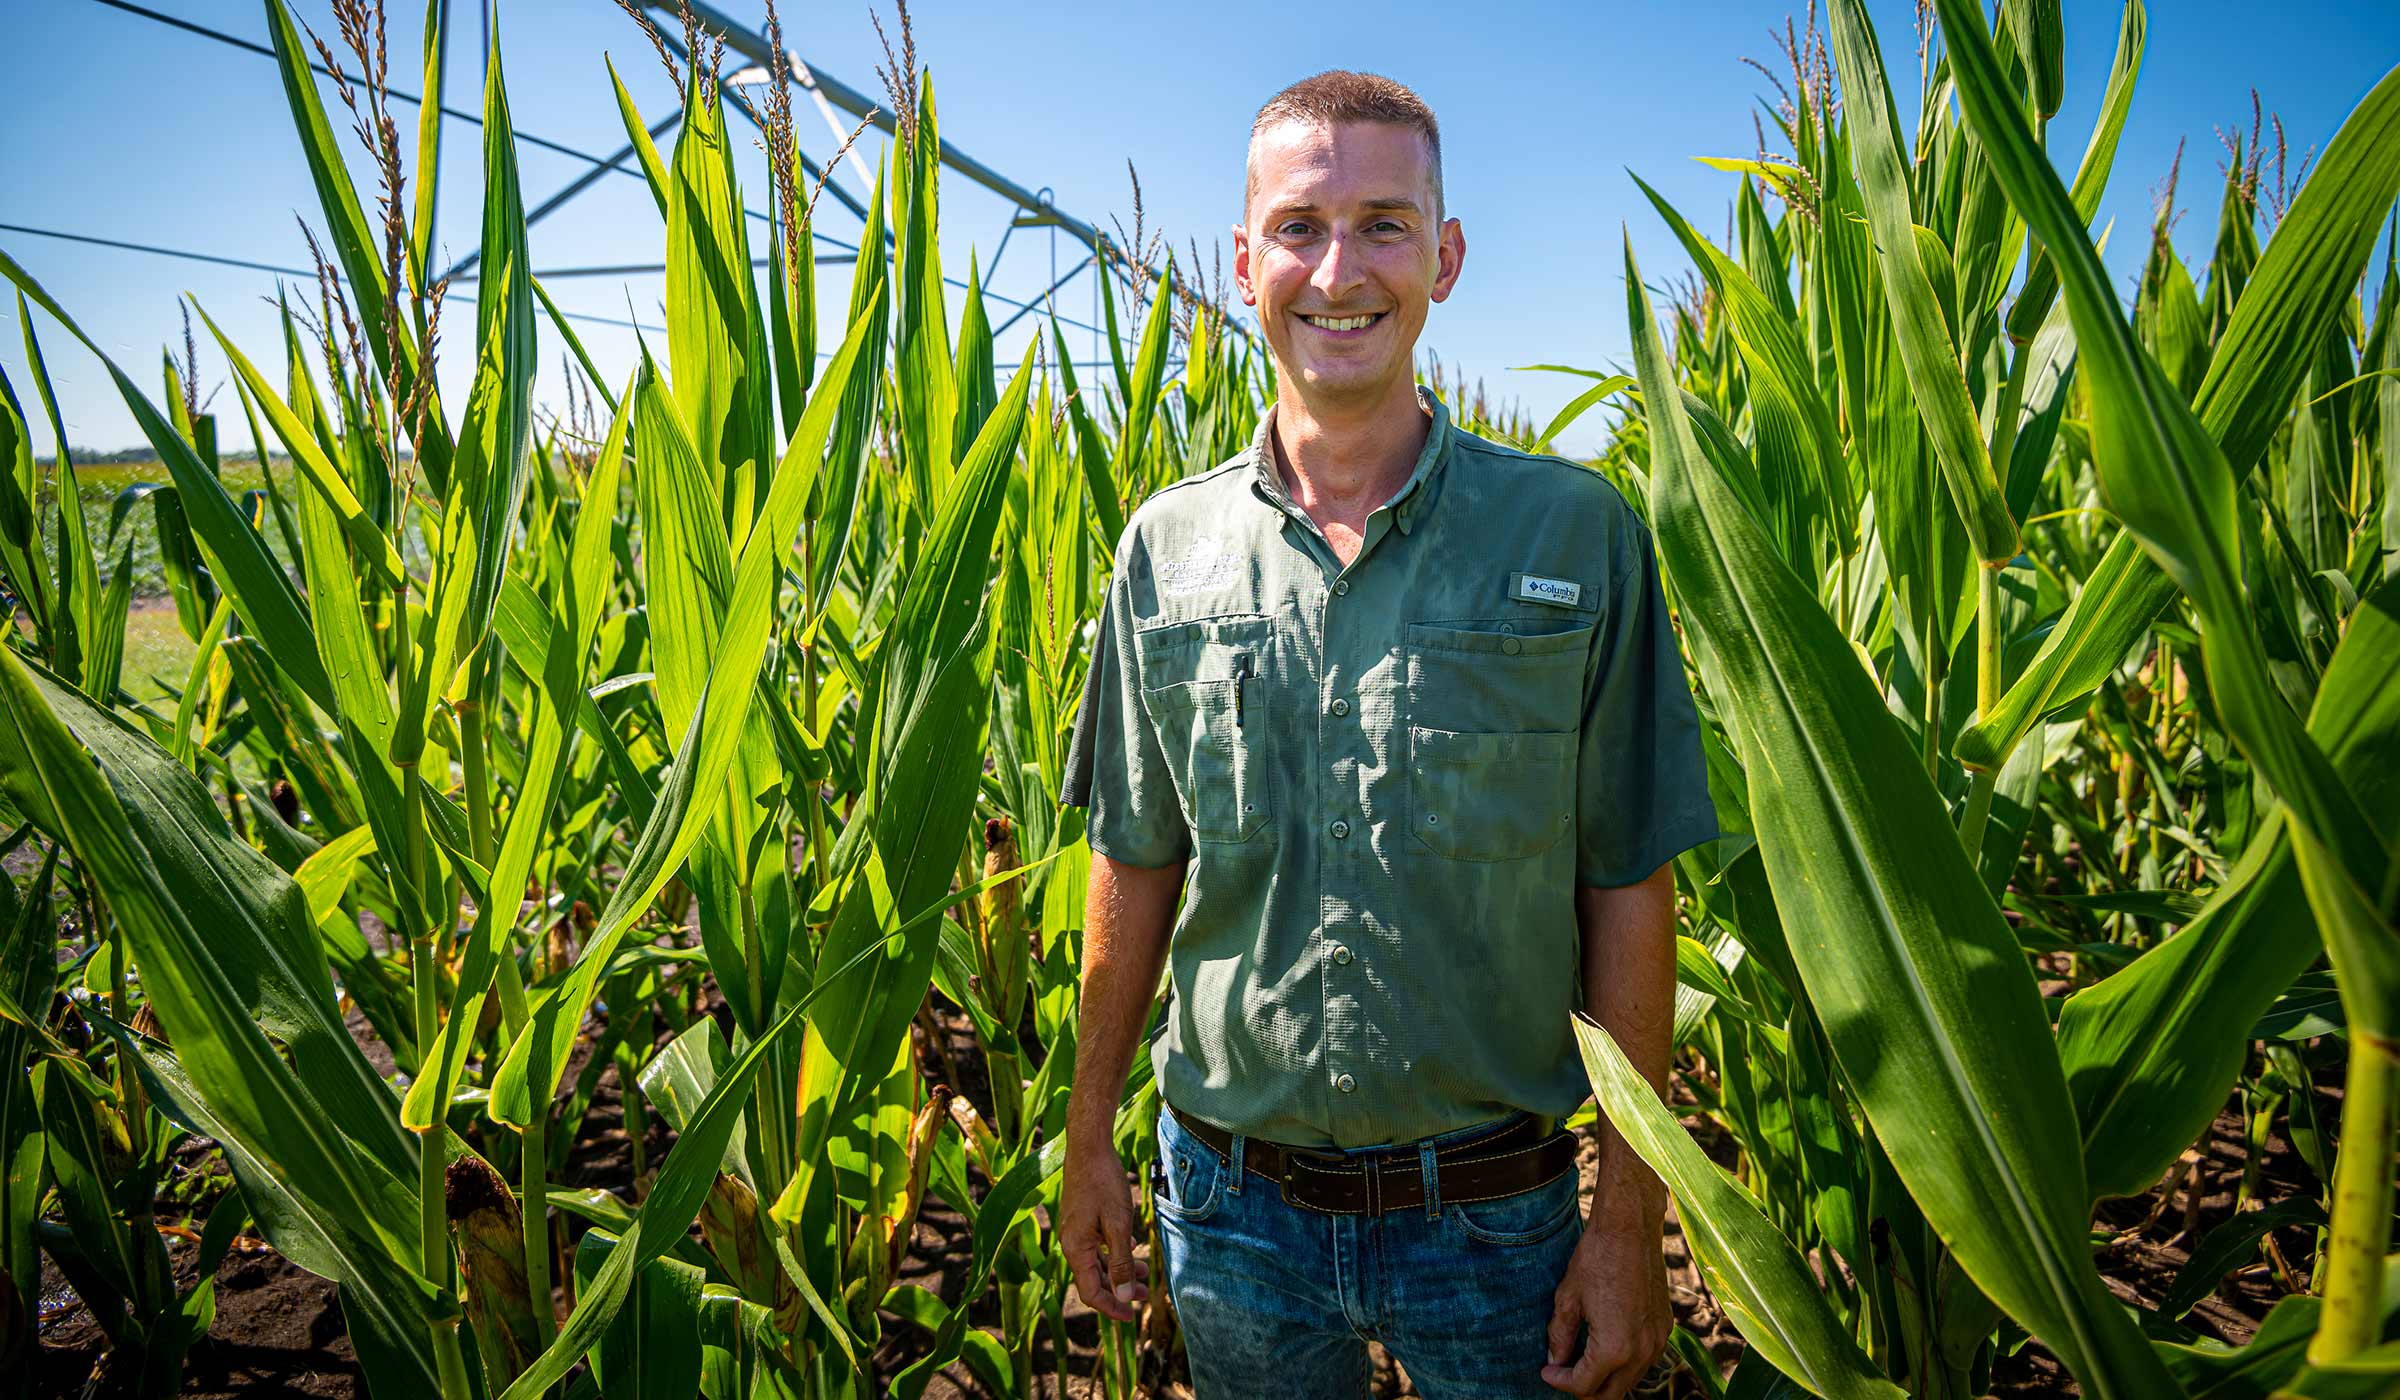 Graham Oakley, pictured among tall crops in a sunny field.